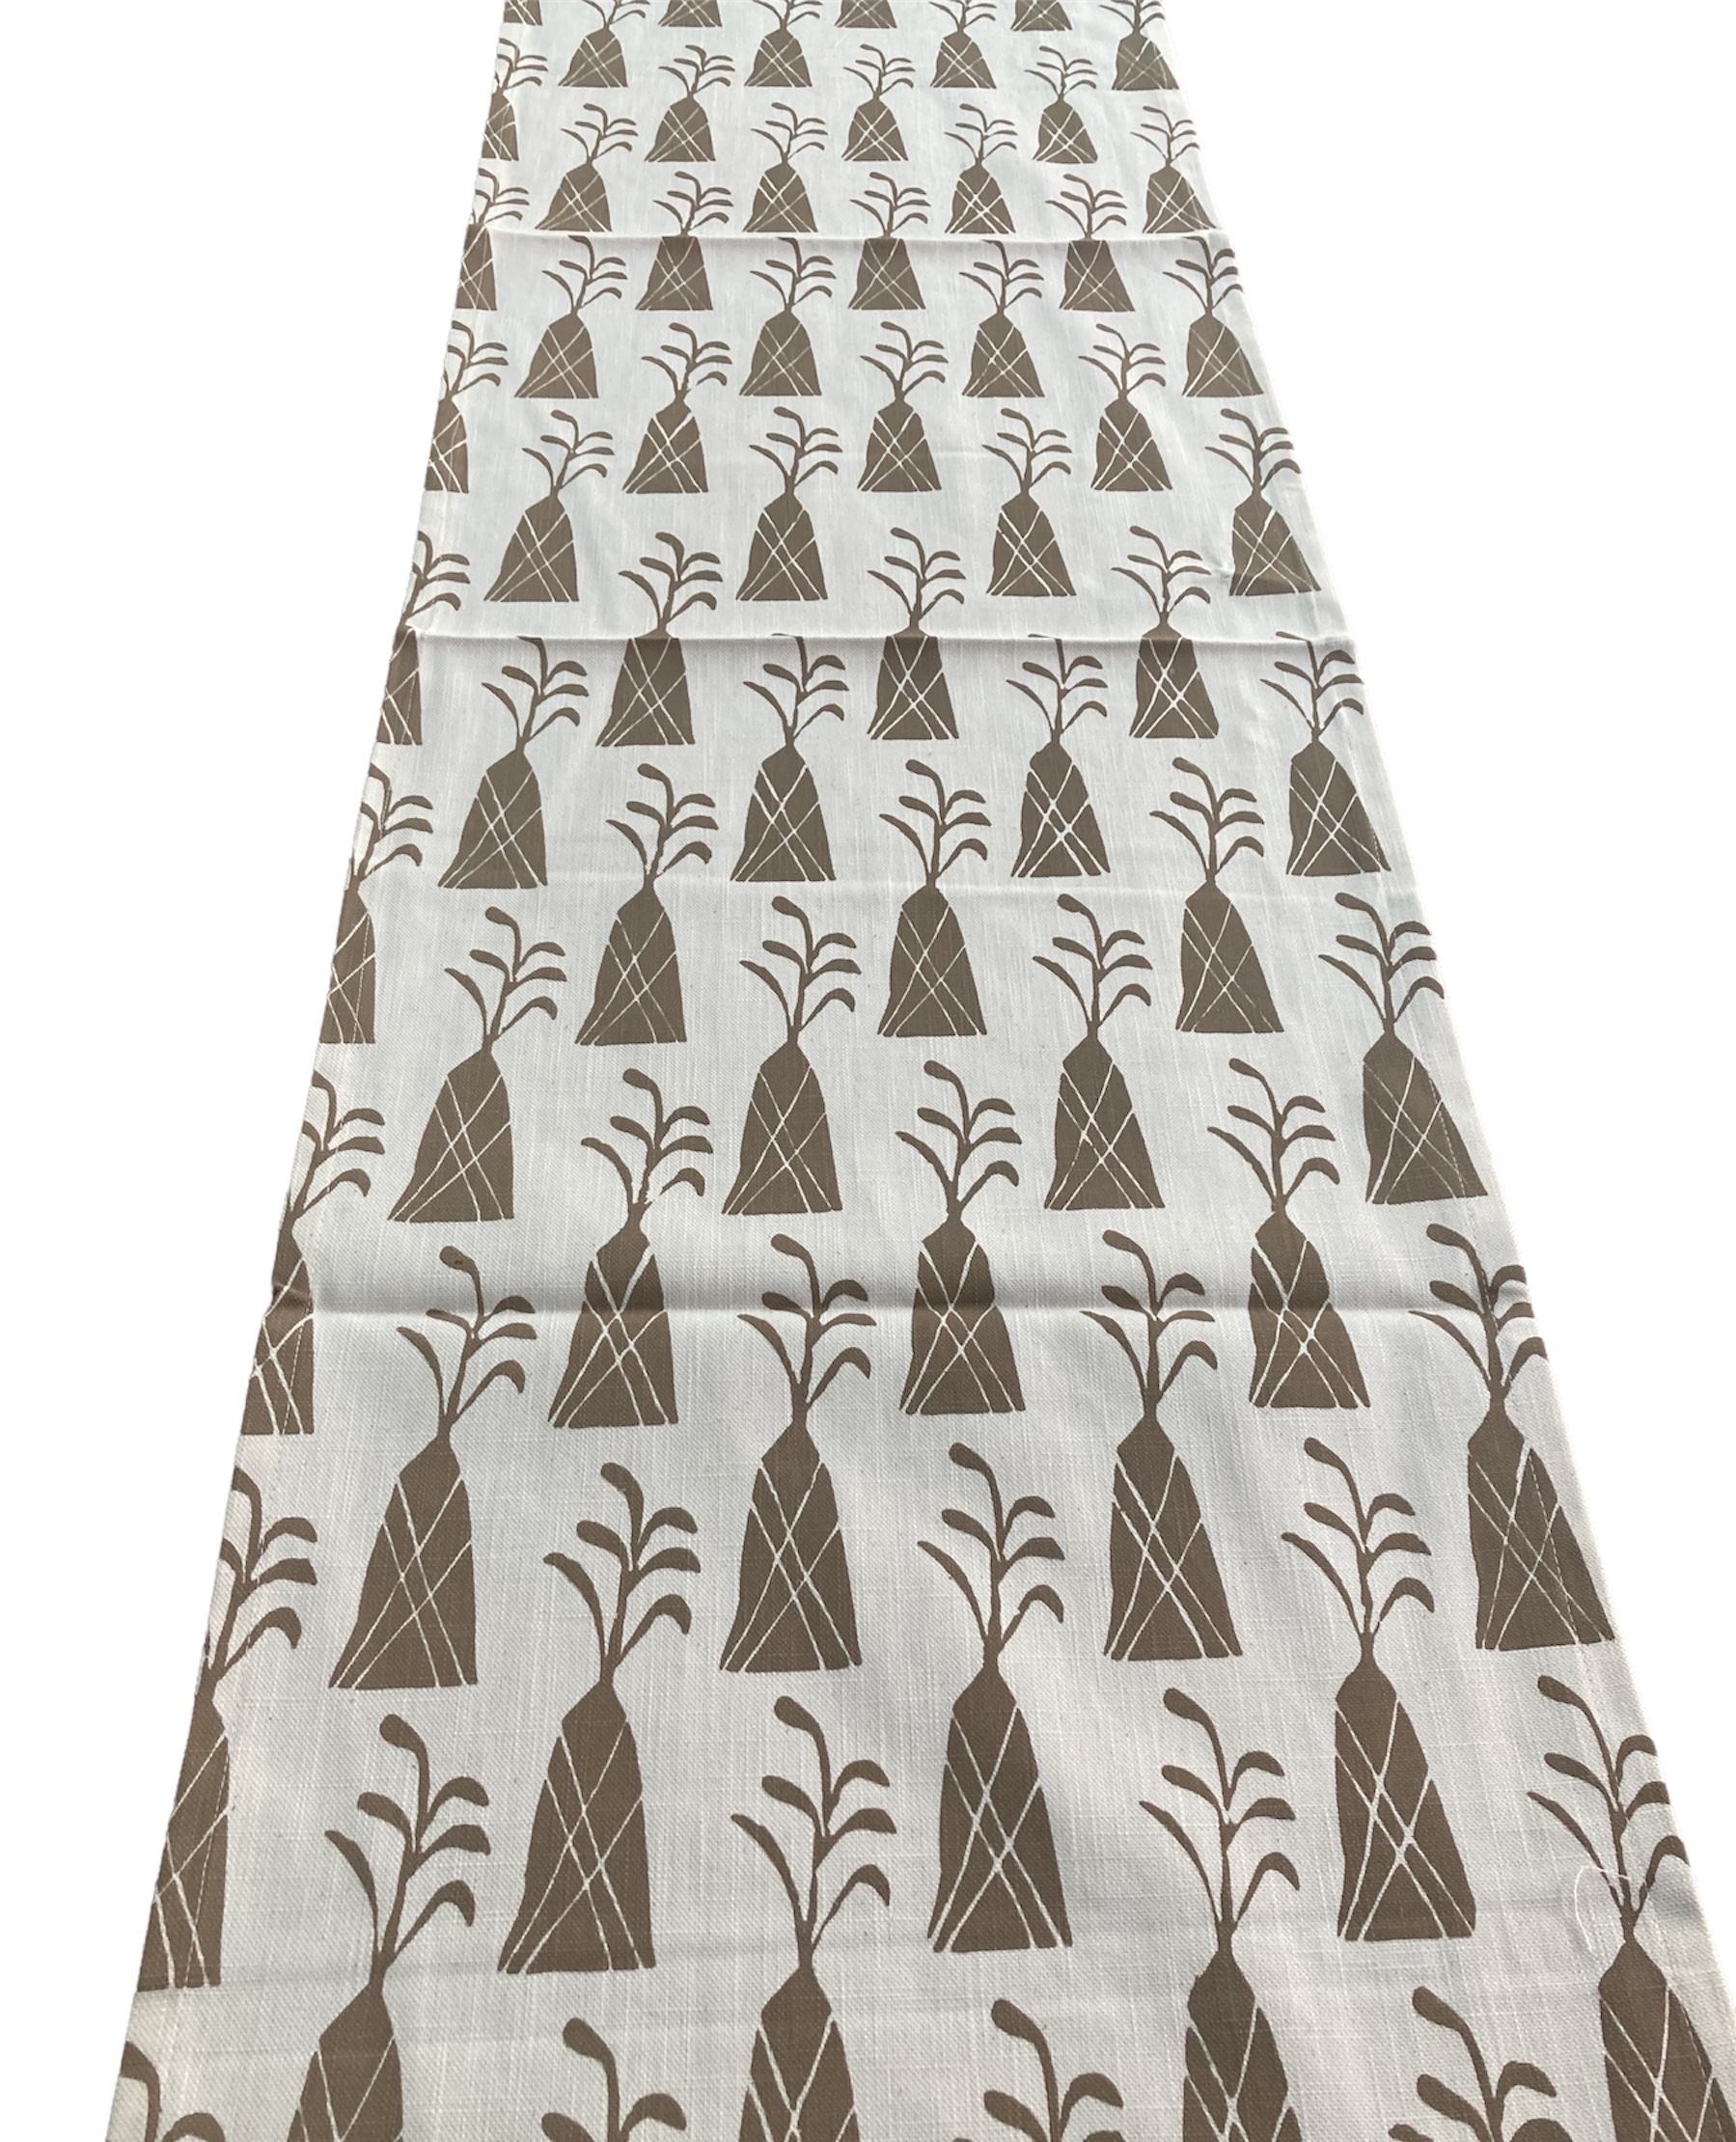 100% cotton Table Runner 96\" x 16\" from Namibia - Design 23l